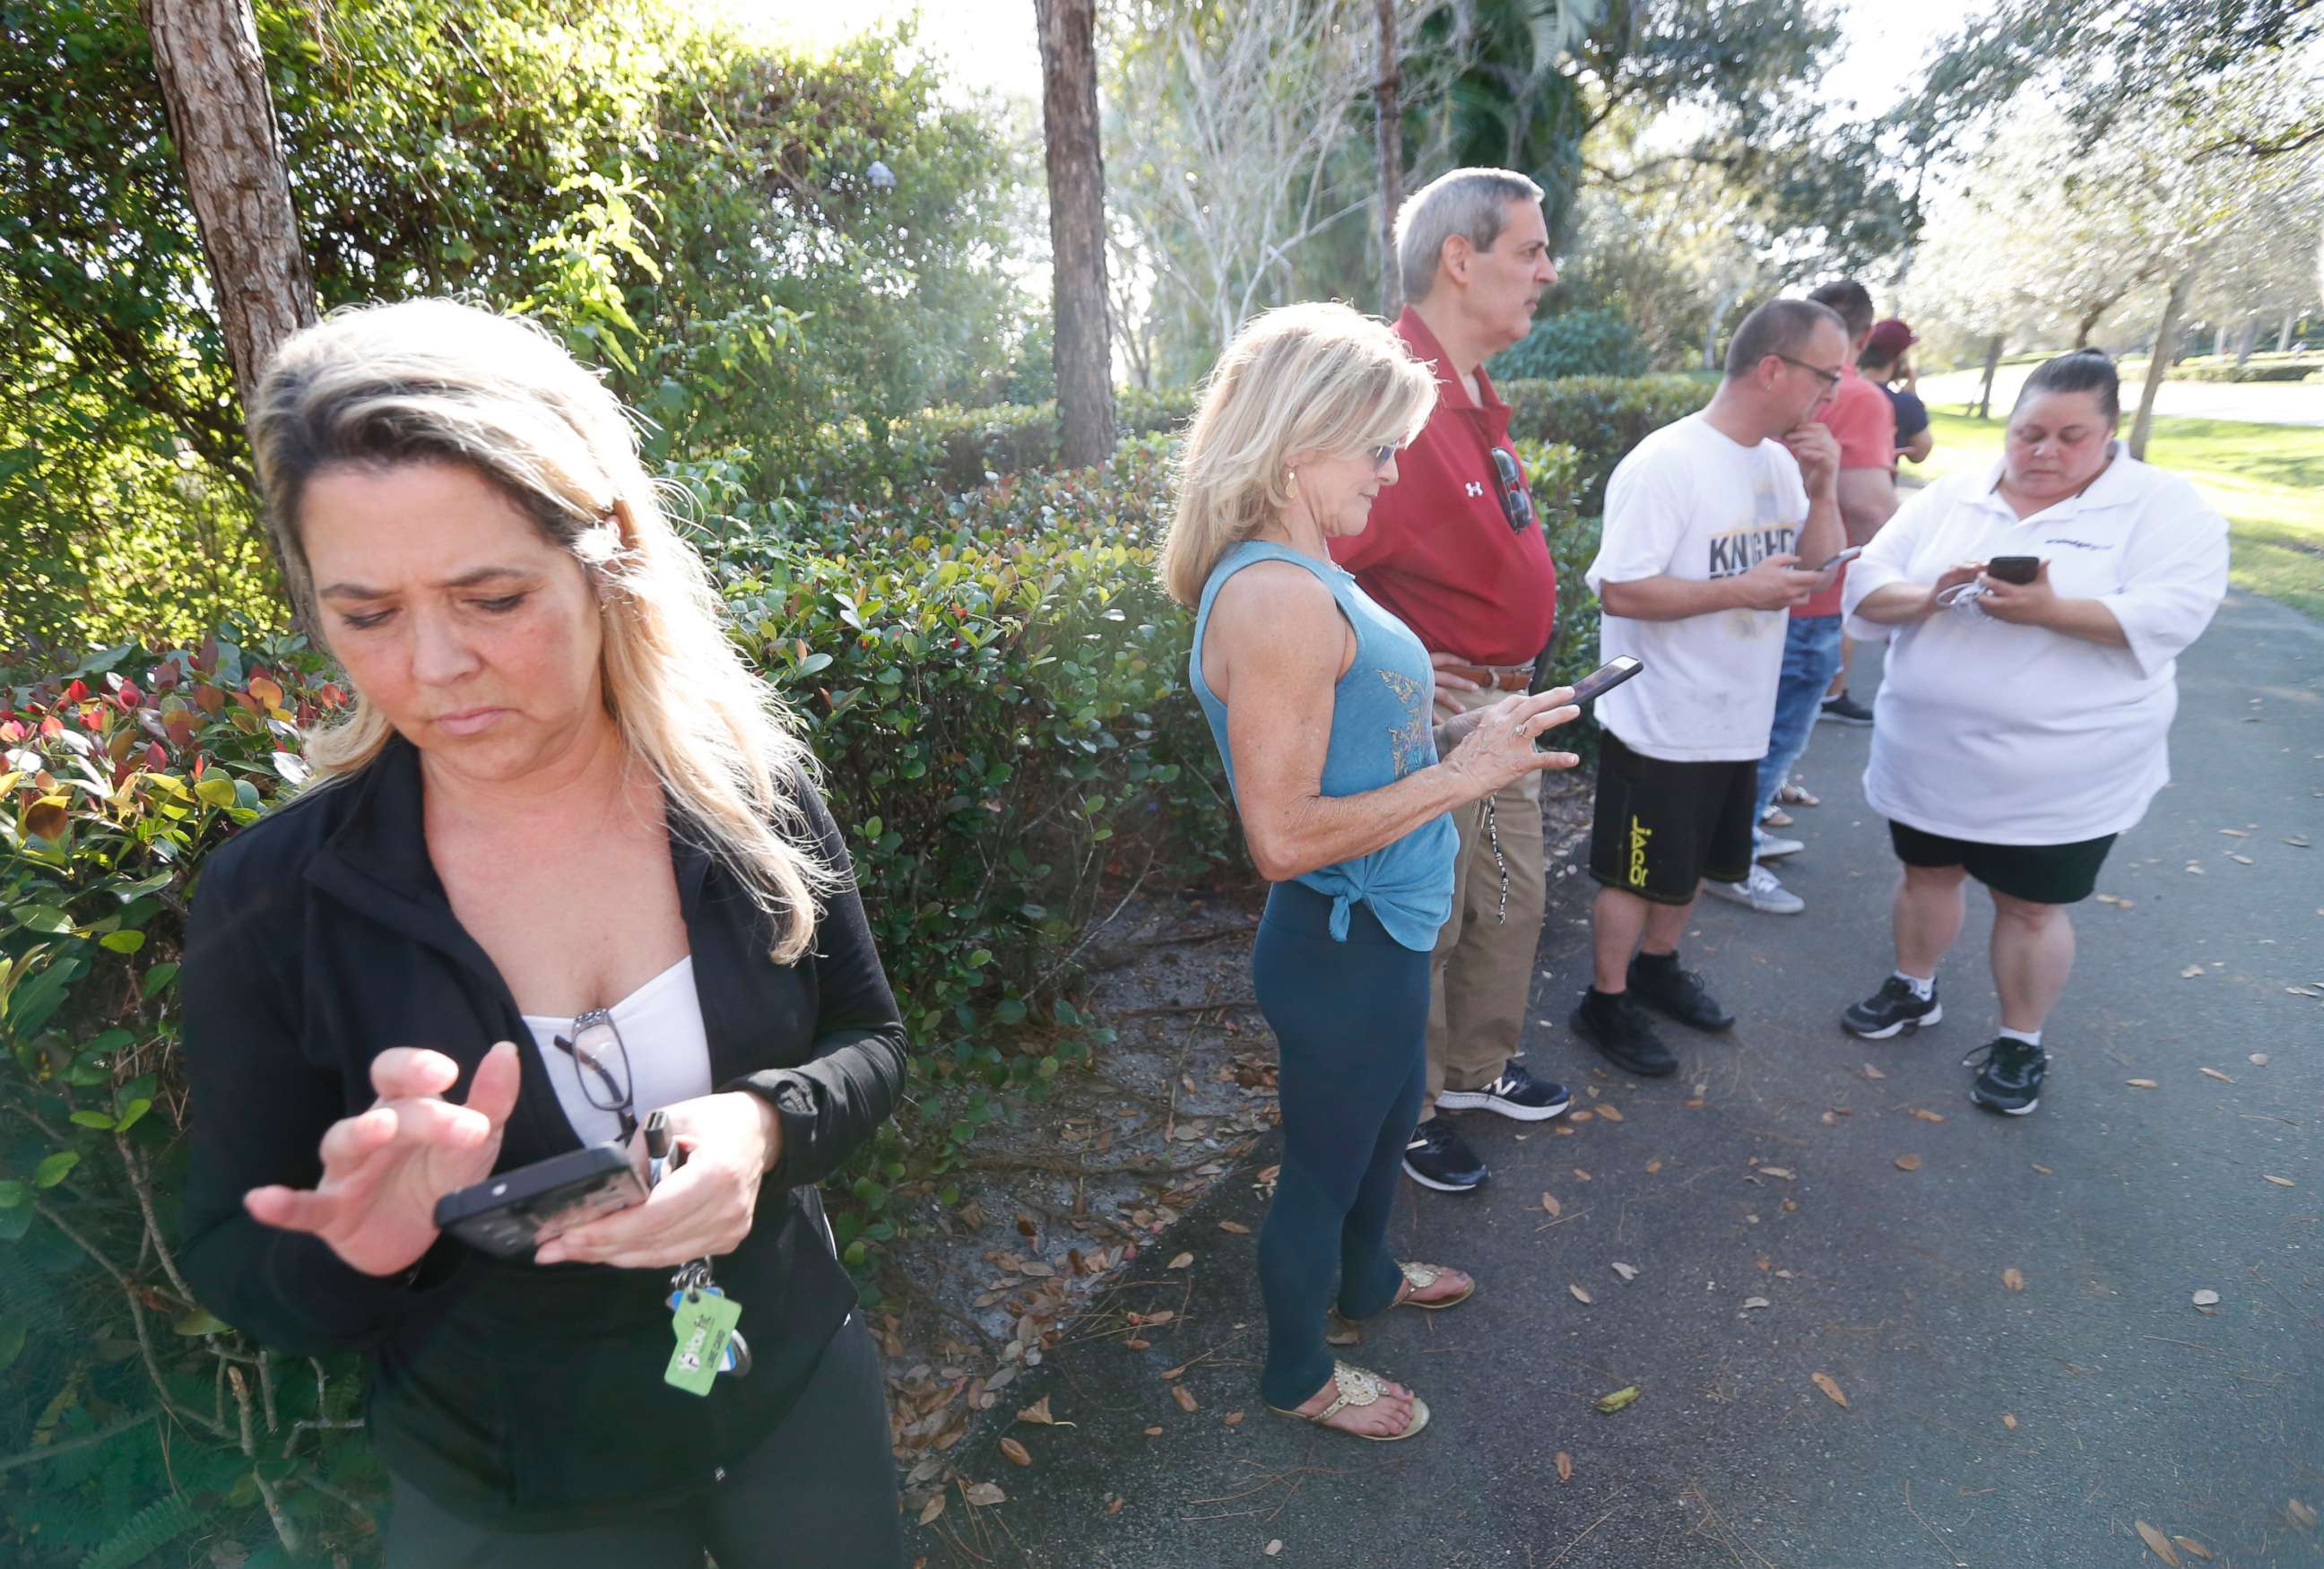 PHOTO: Anxious family members wait for information on students, Feb. 14, 2018, in Parkland, Fla. after a shooting at Marjory Stoneman Douglas High School.